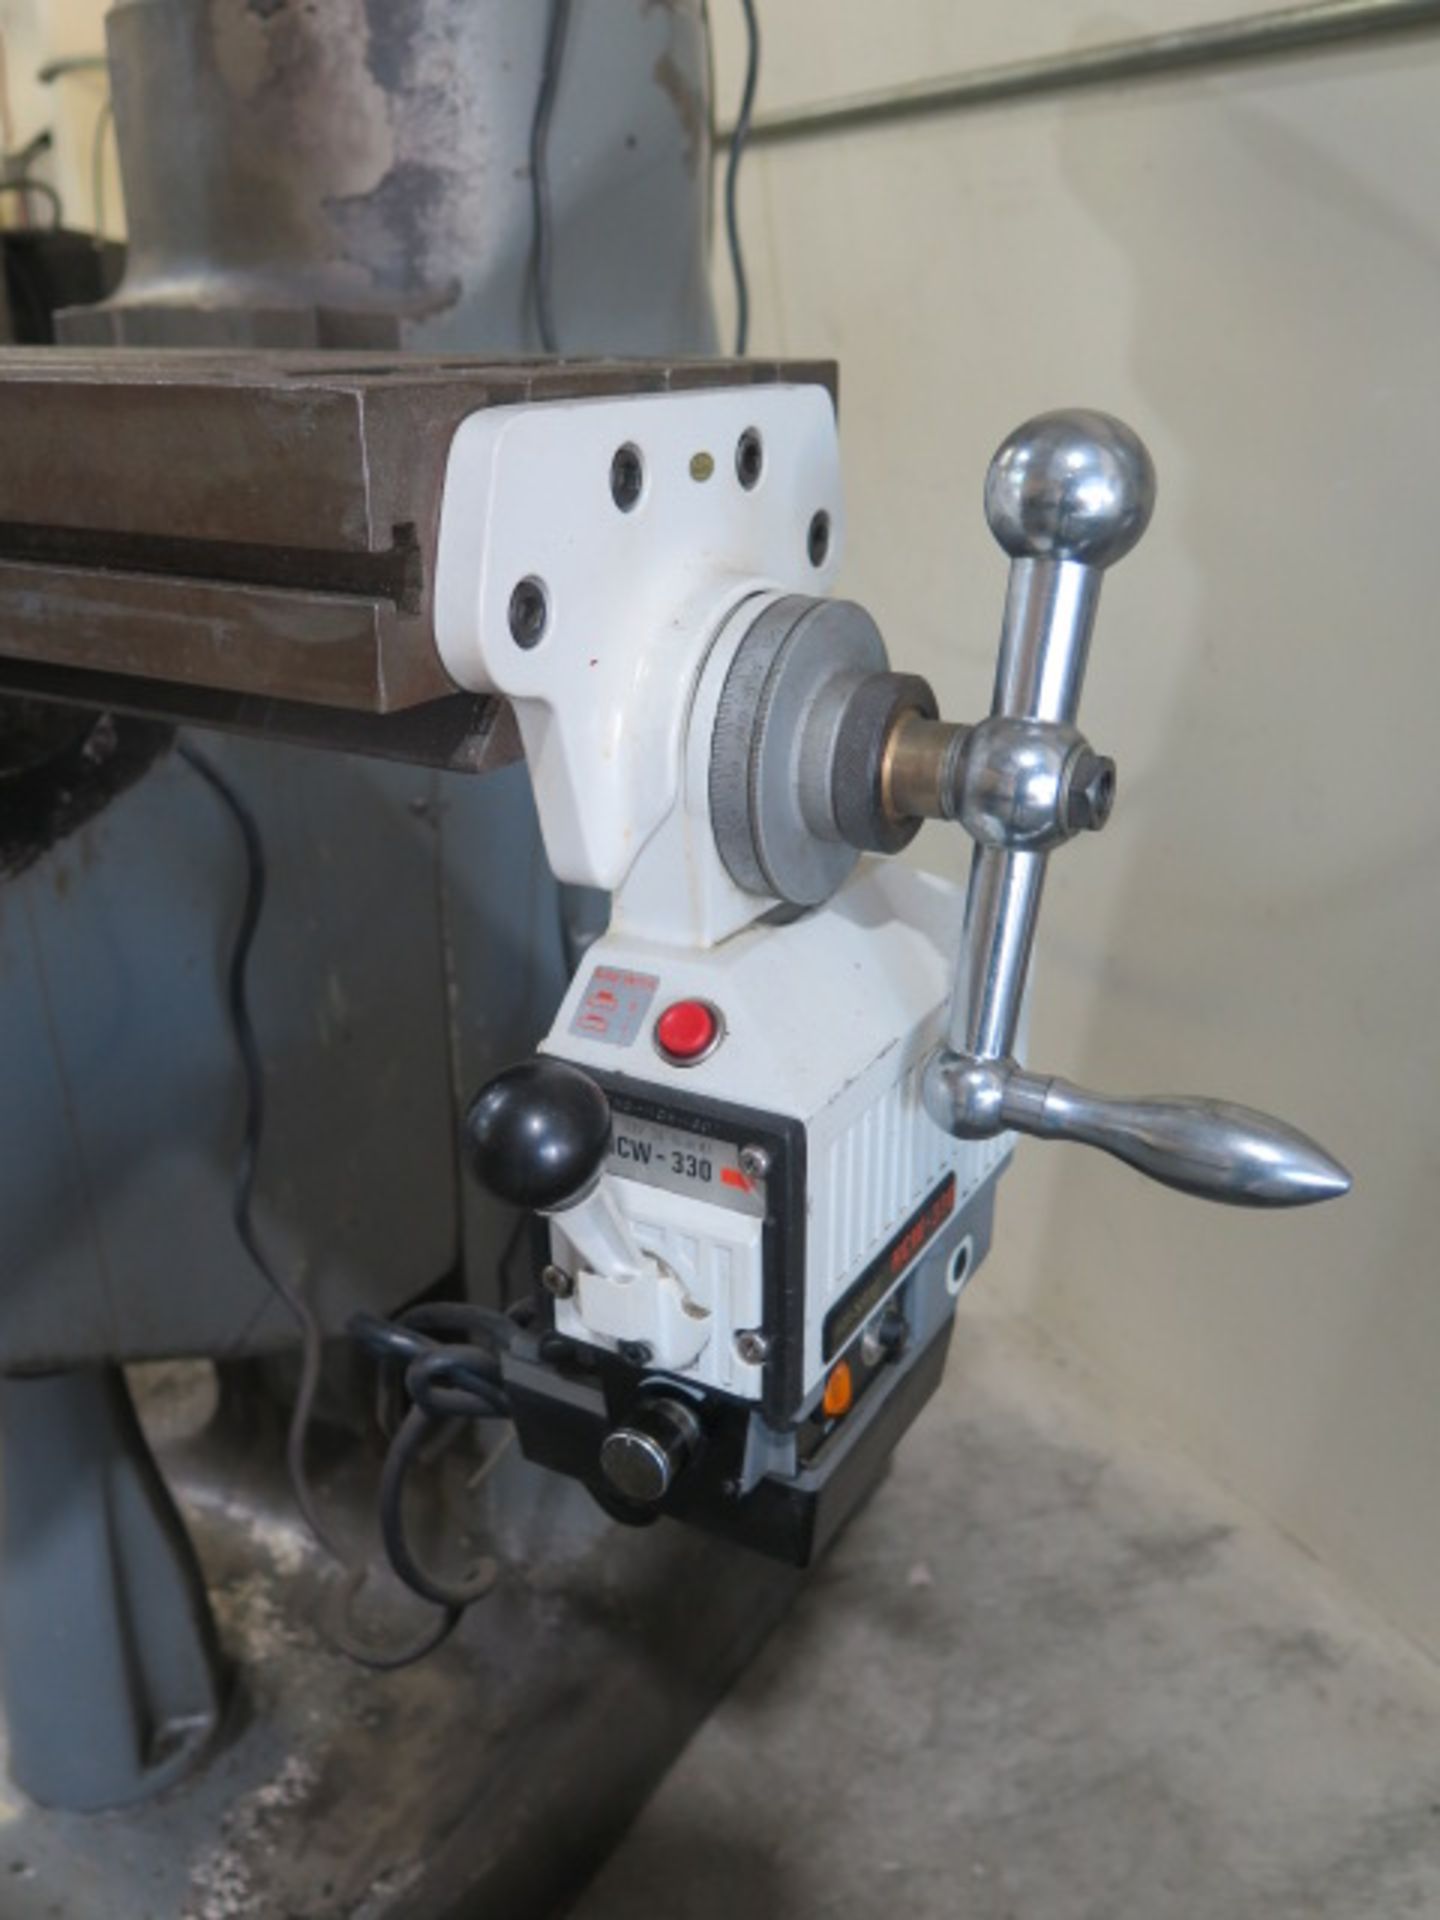 Bridgeport Vertical Mill s/n 151345 w/ 1.5Hp Motor, 60-4200 Dial Change RPM, Trava-Dial, Power Feed, - Image 6 of 11